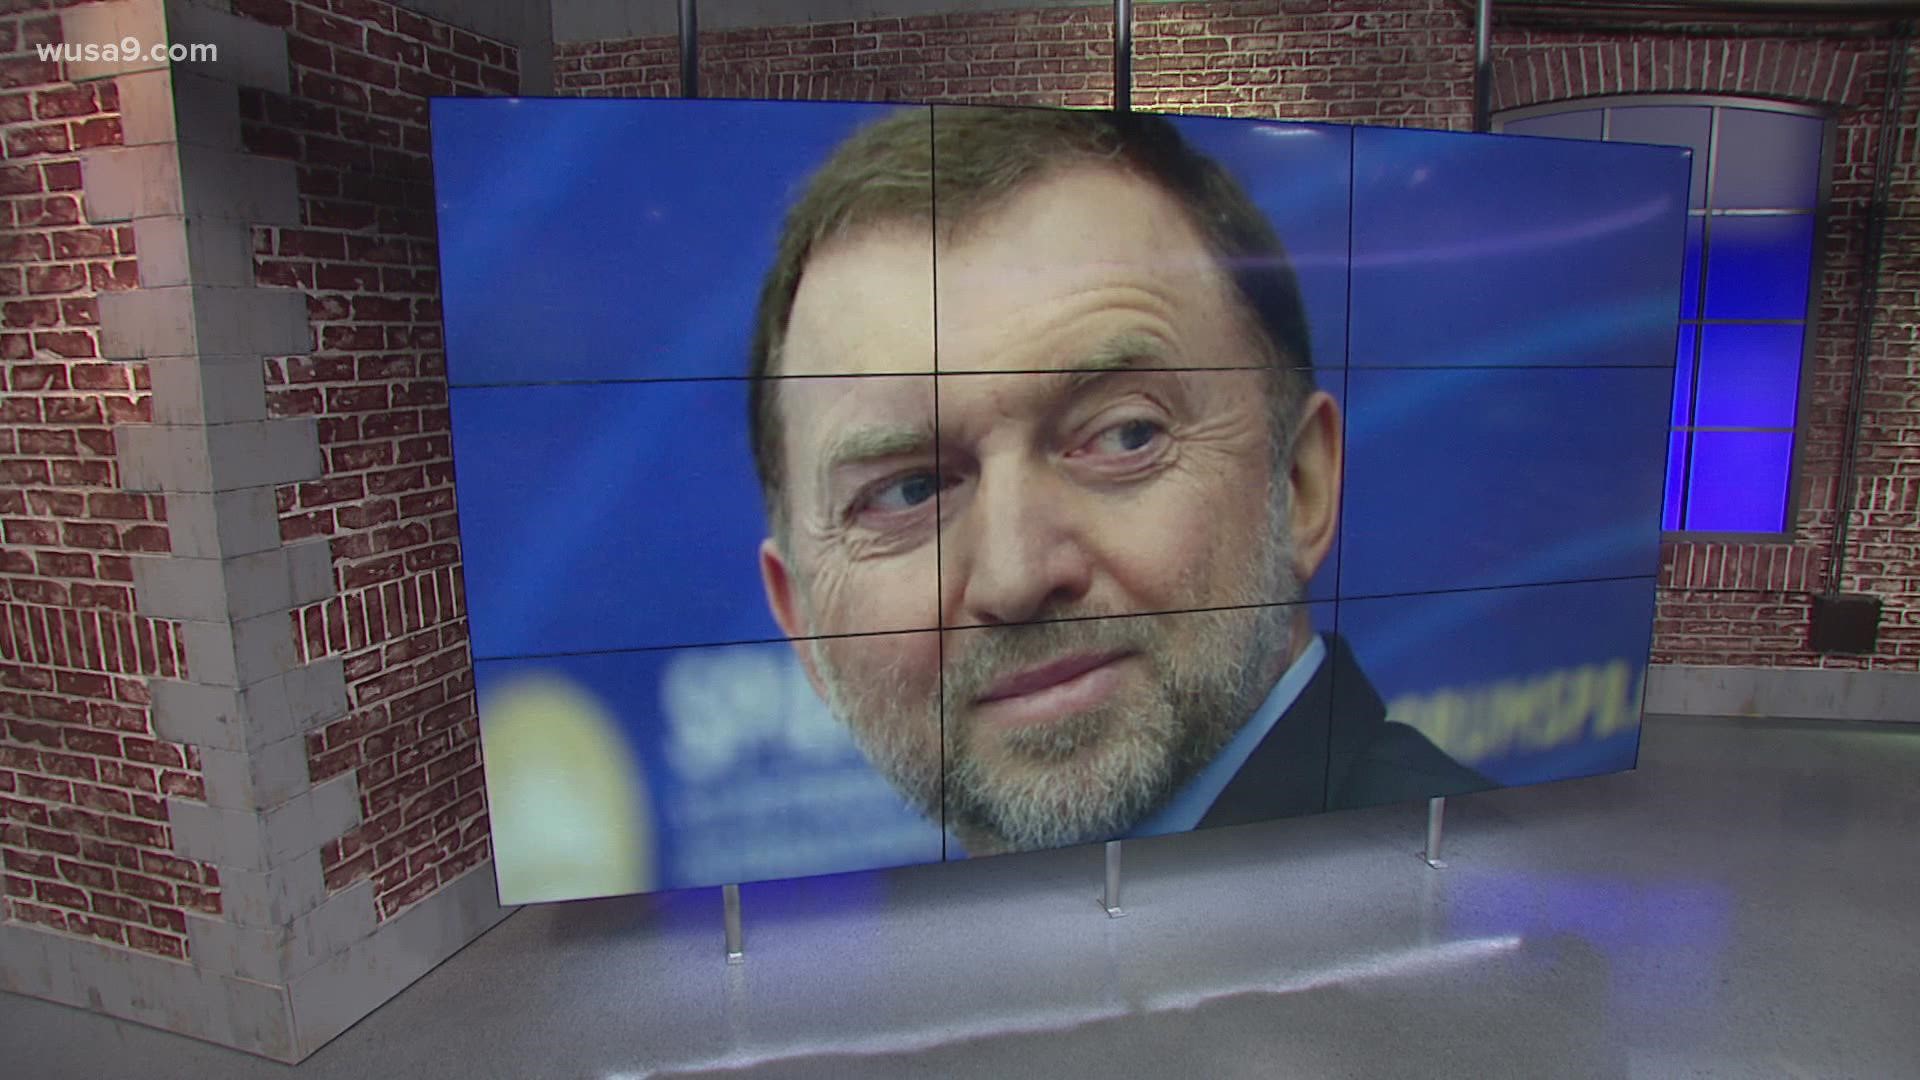 Russian oligarch Oleg Deripaska is a close ally of Vladimir Putin and was mentioned in Robert Mueller’s report on interference in the 2016 presidential election.